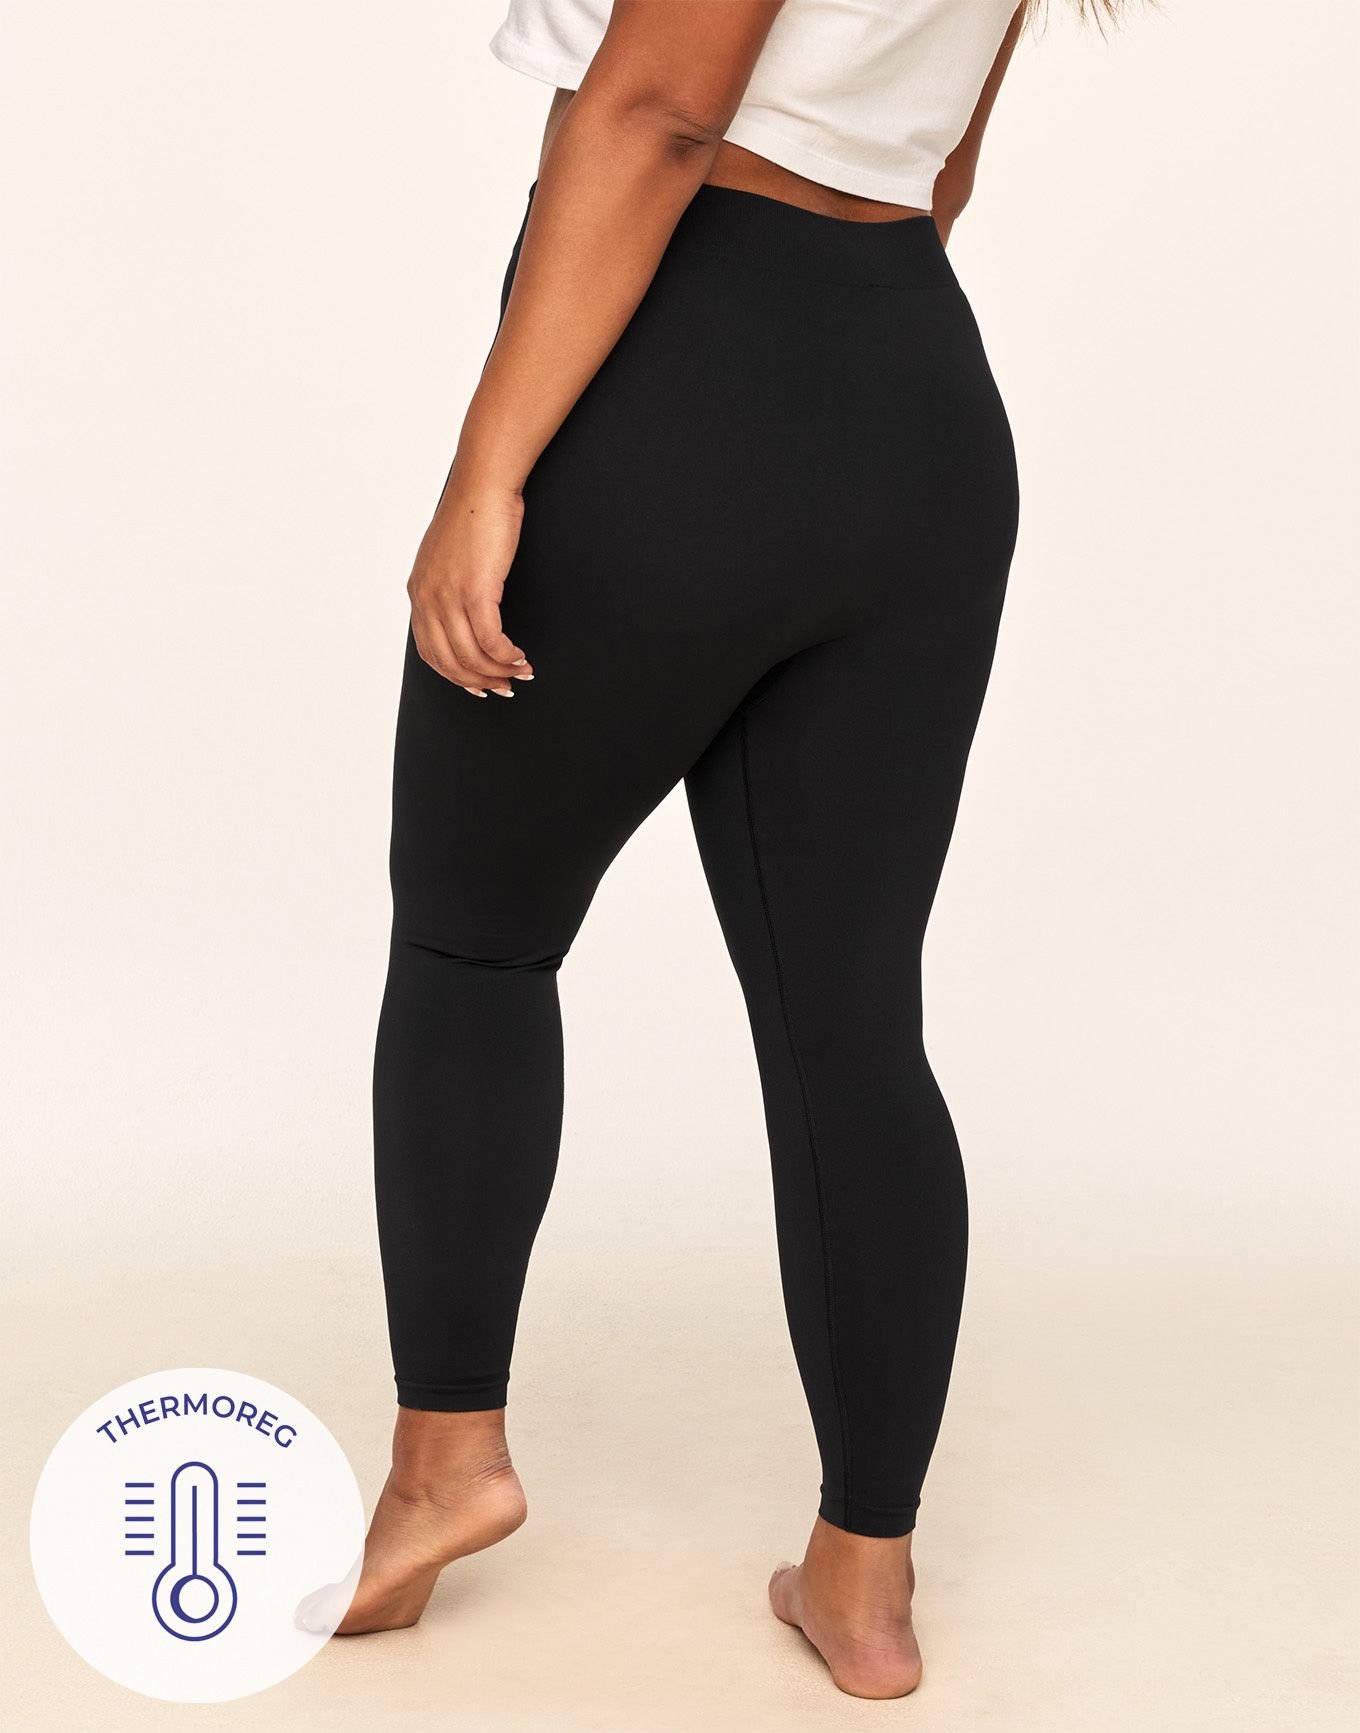 High-Waisted Jersey Plus-Size Leggings